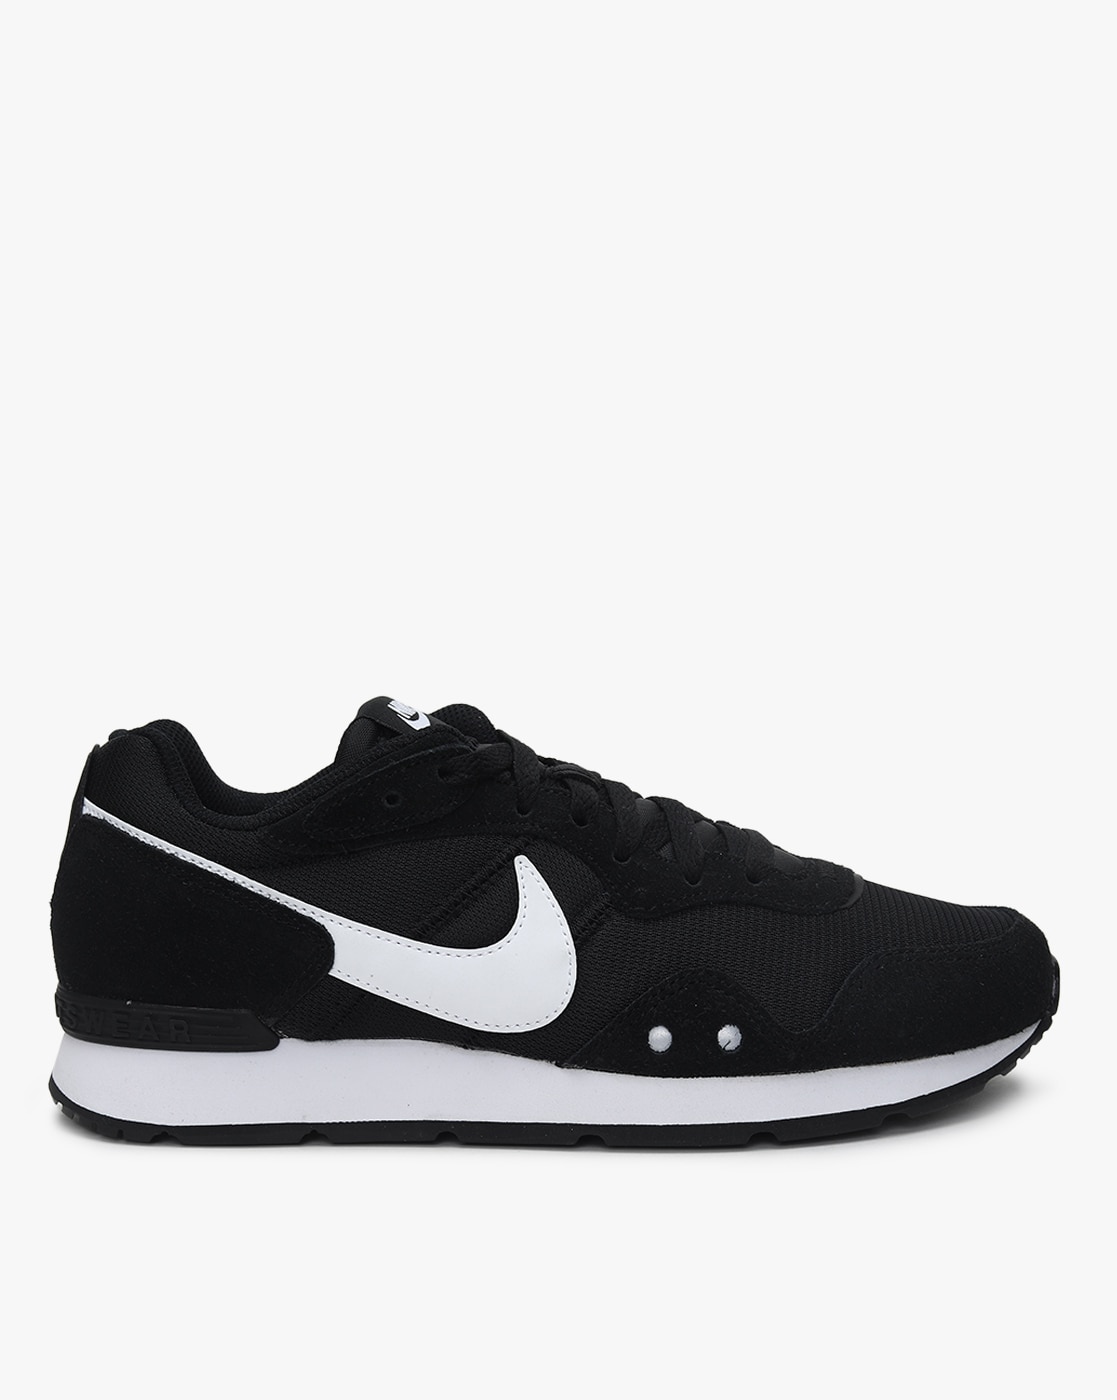 Buy Nike Sports Shoes Online for Men in India at Best Price | Myntra